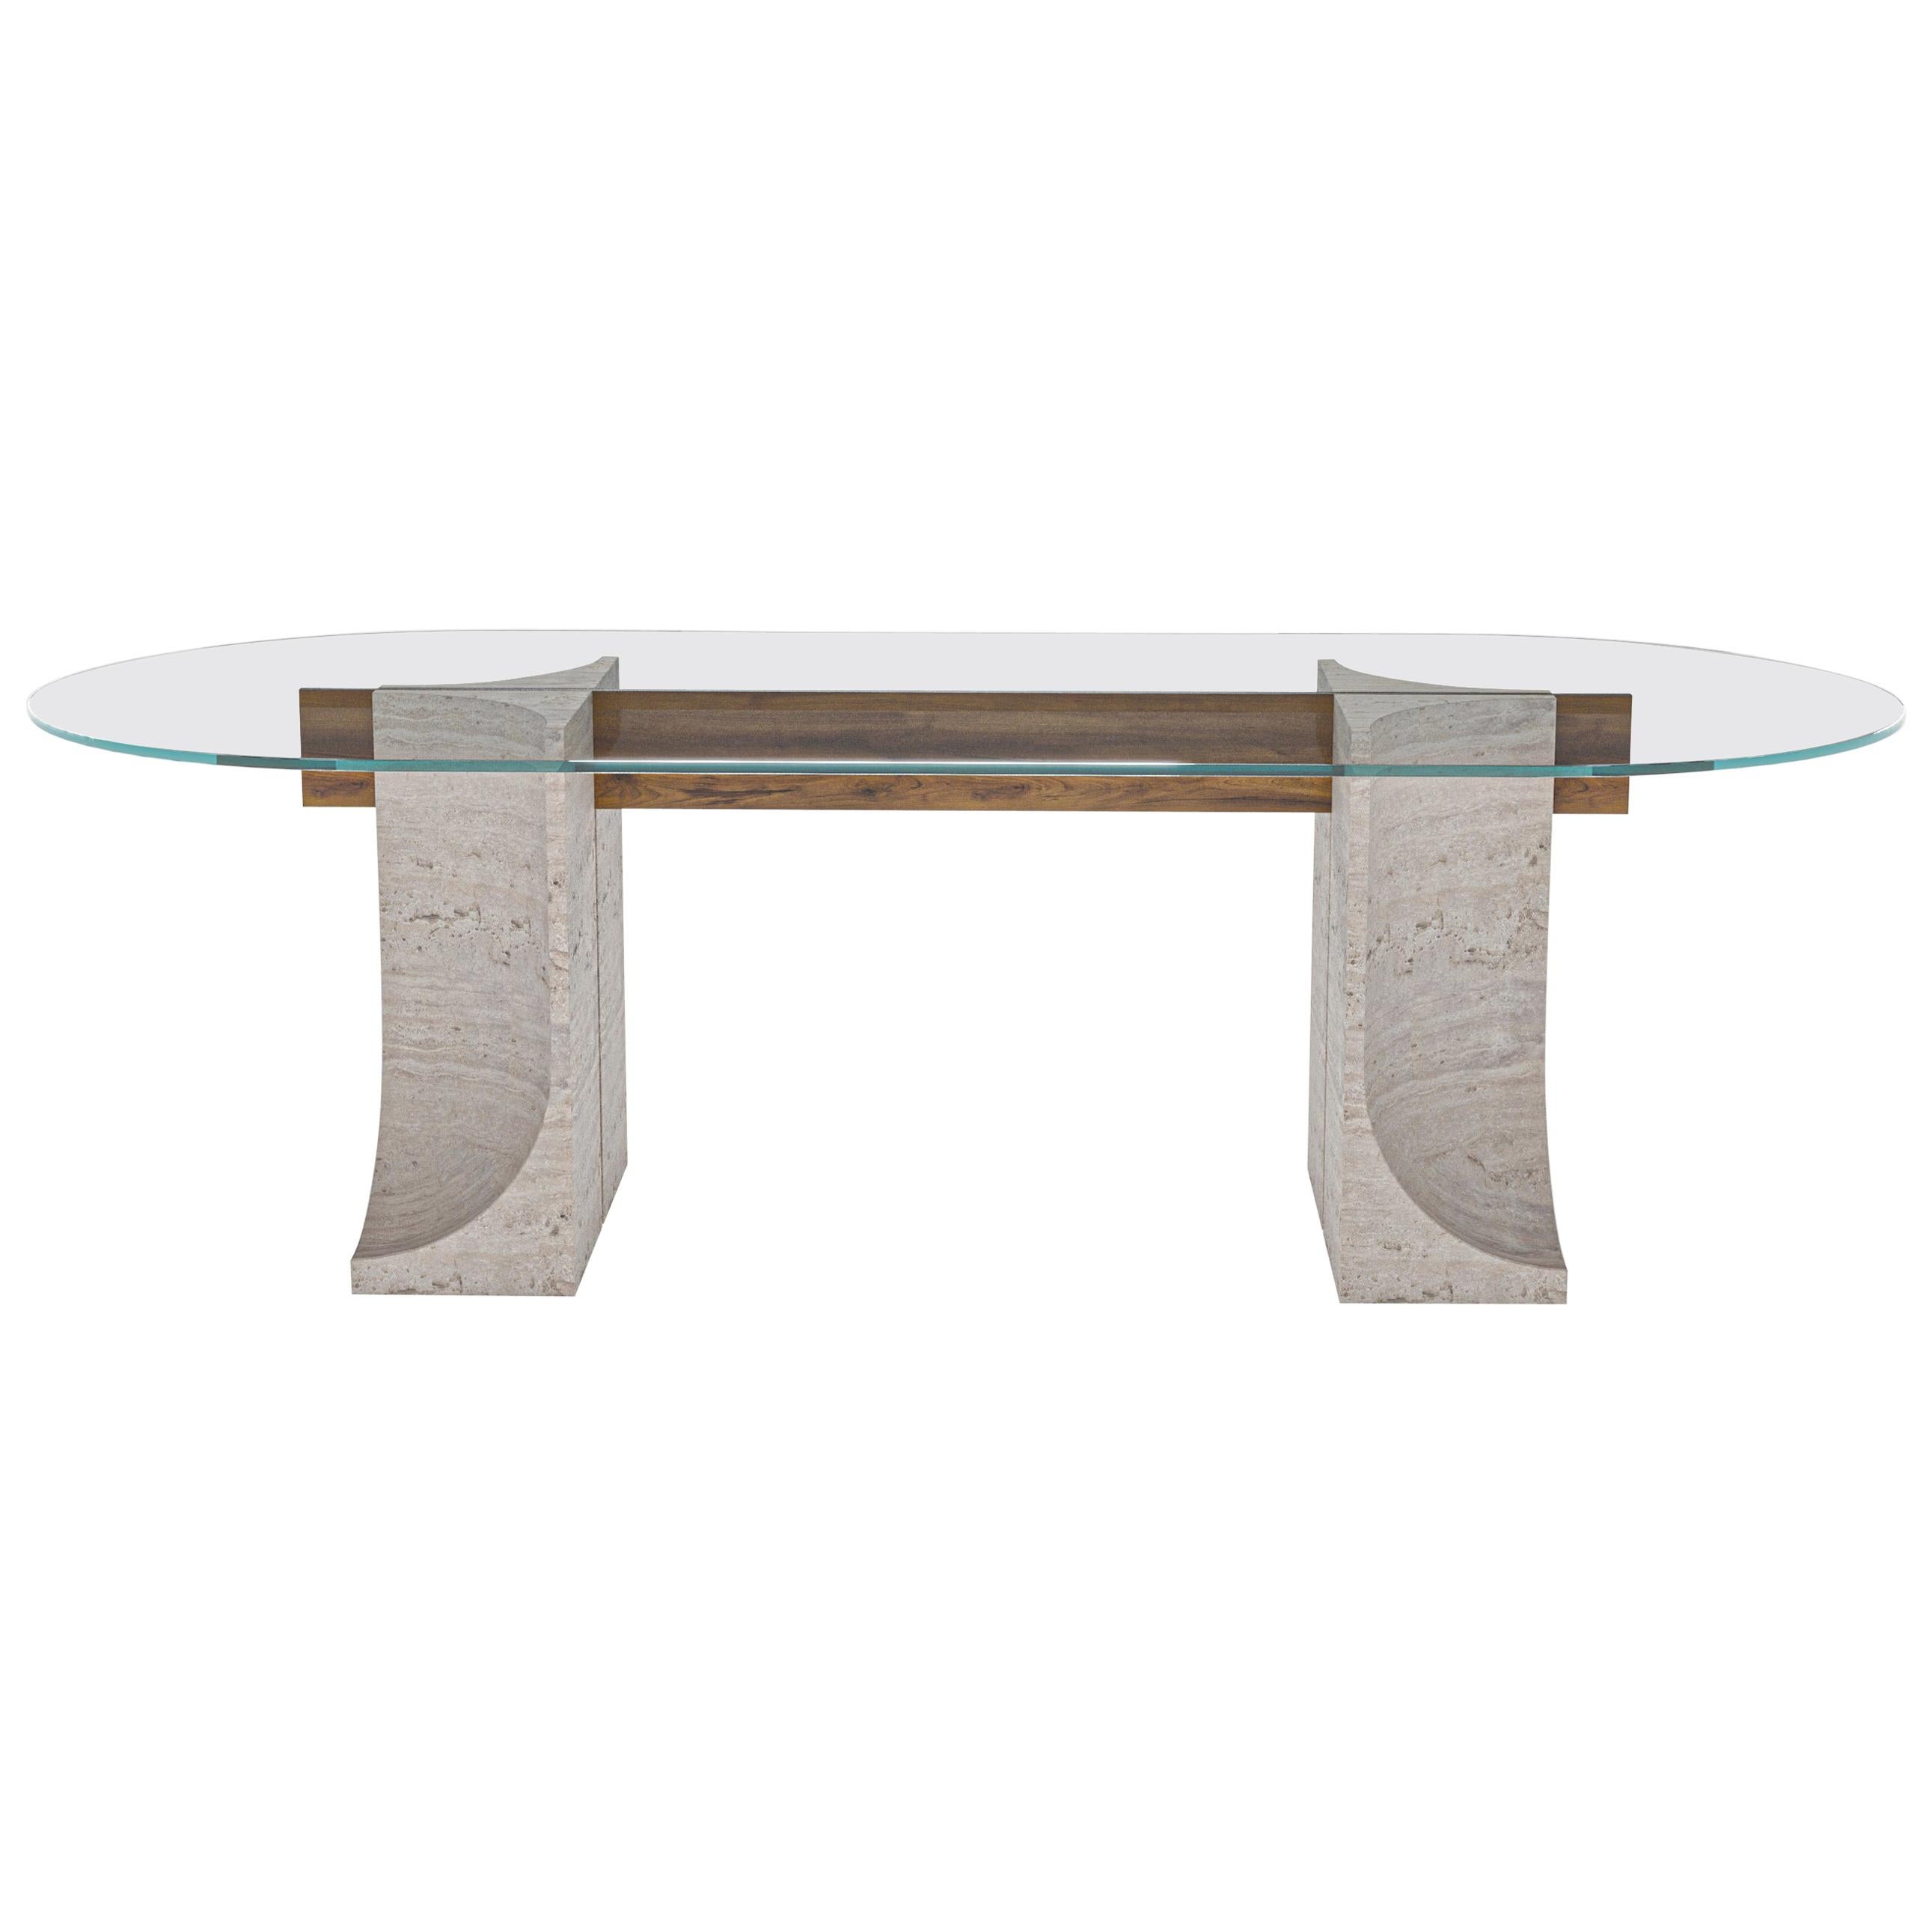 Contemporary Modern Edge Dining Table in Travertino Marble by Collector Studio